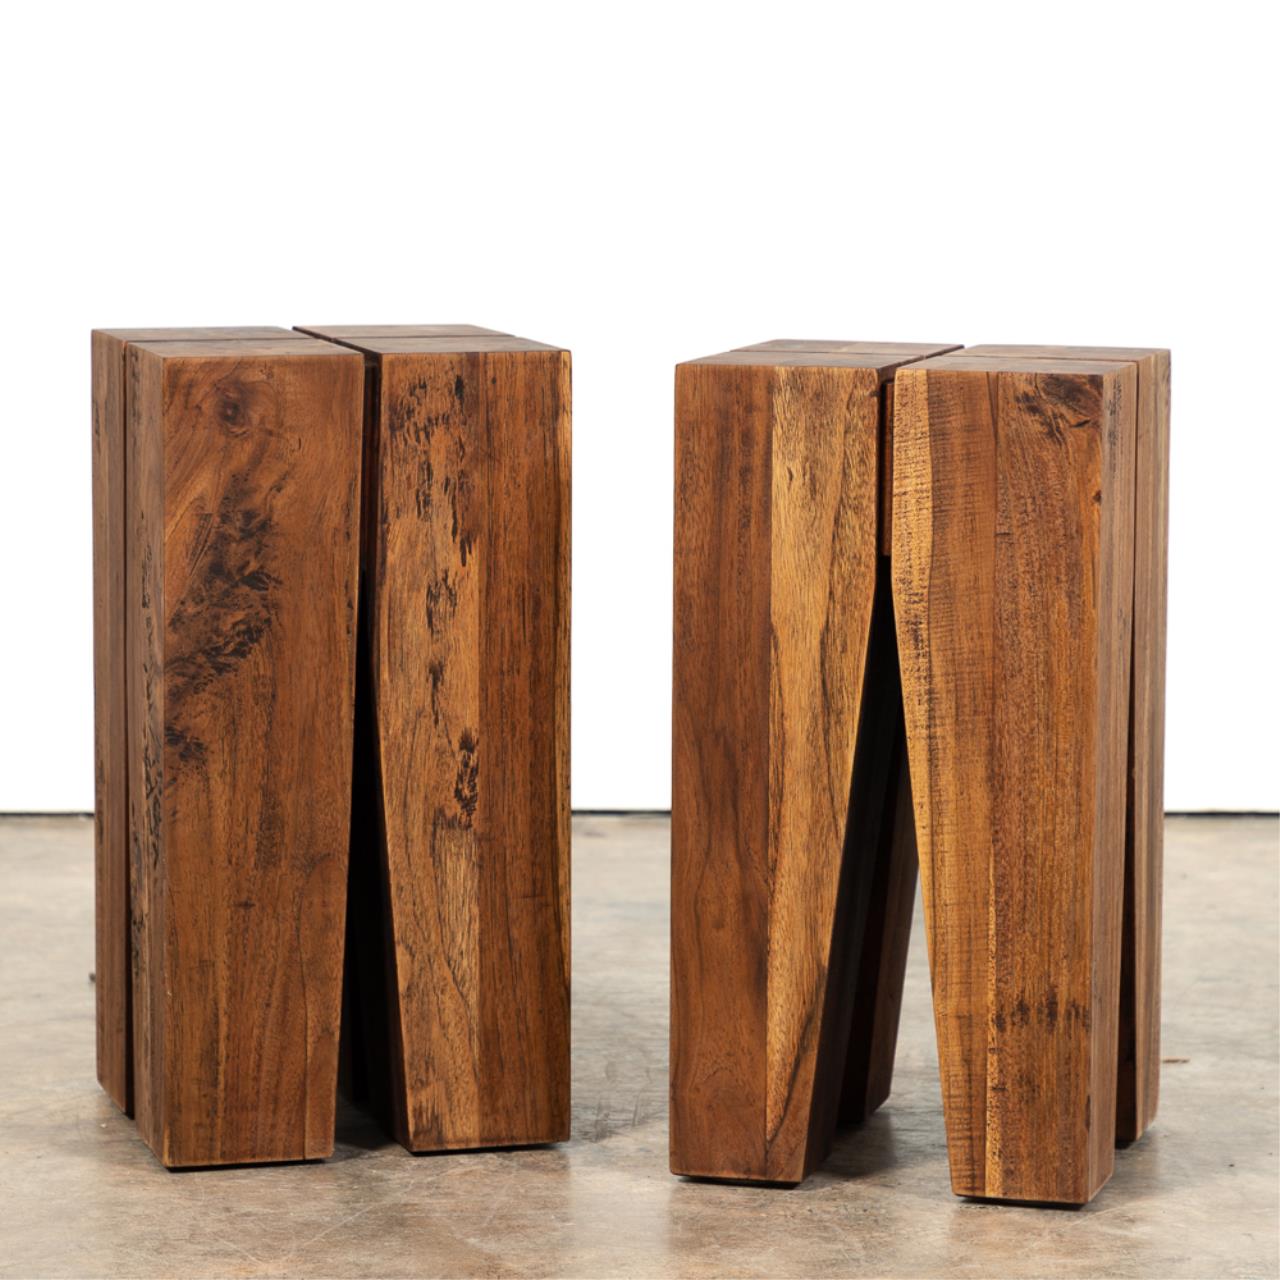 2 EXOTIC WOOD SIDE TABLES MANNER 358daa